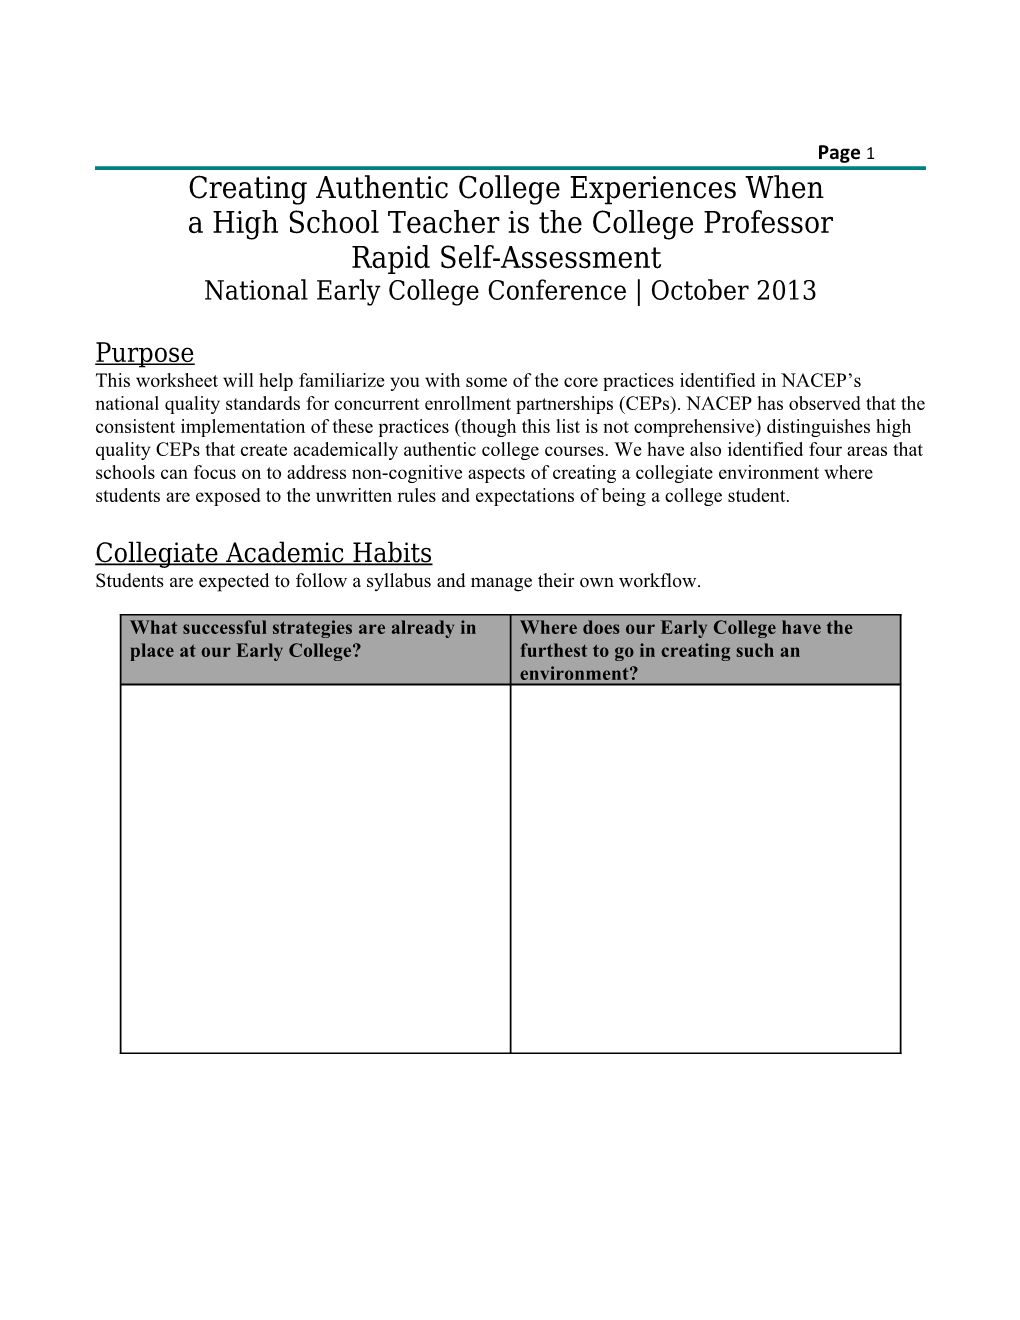 Creating Authentic College Experiences When